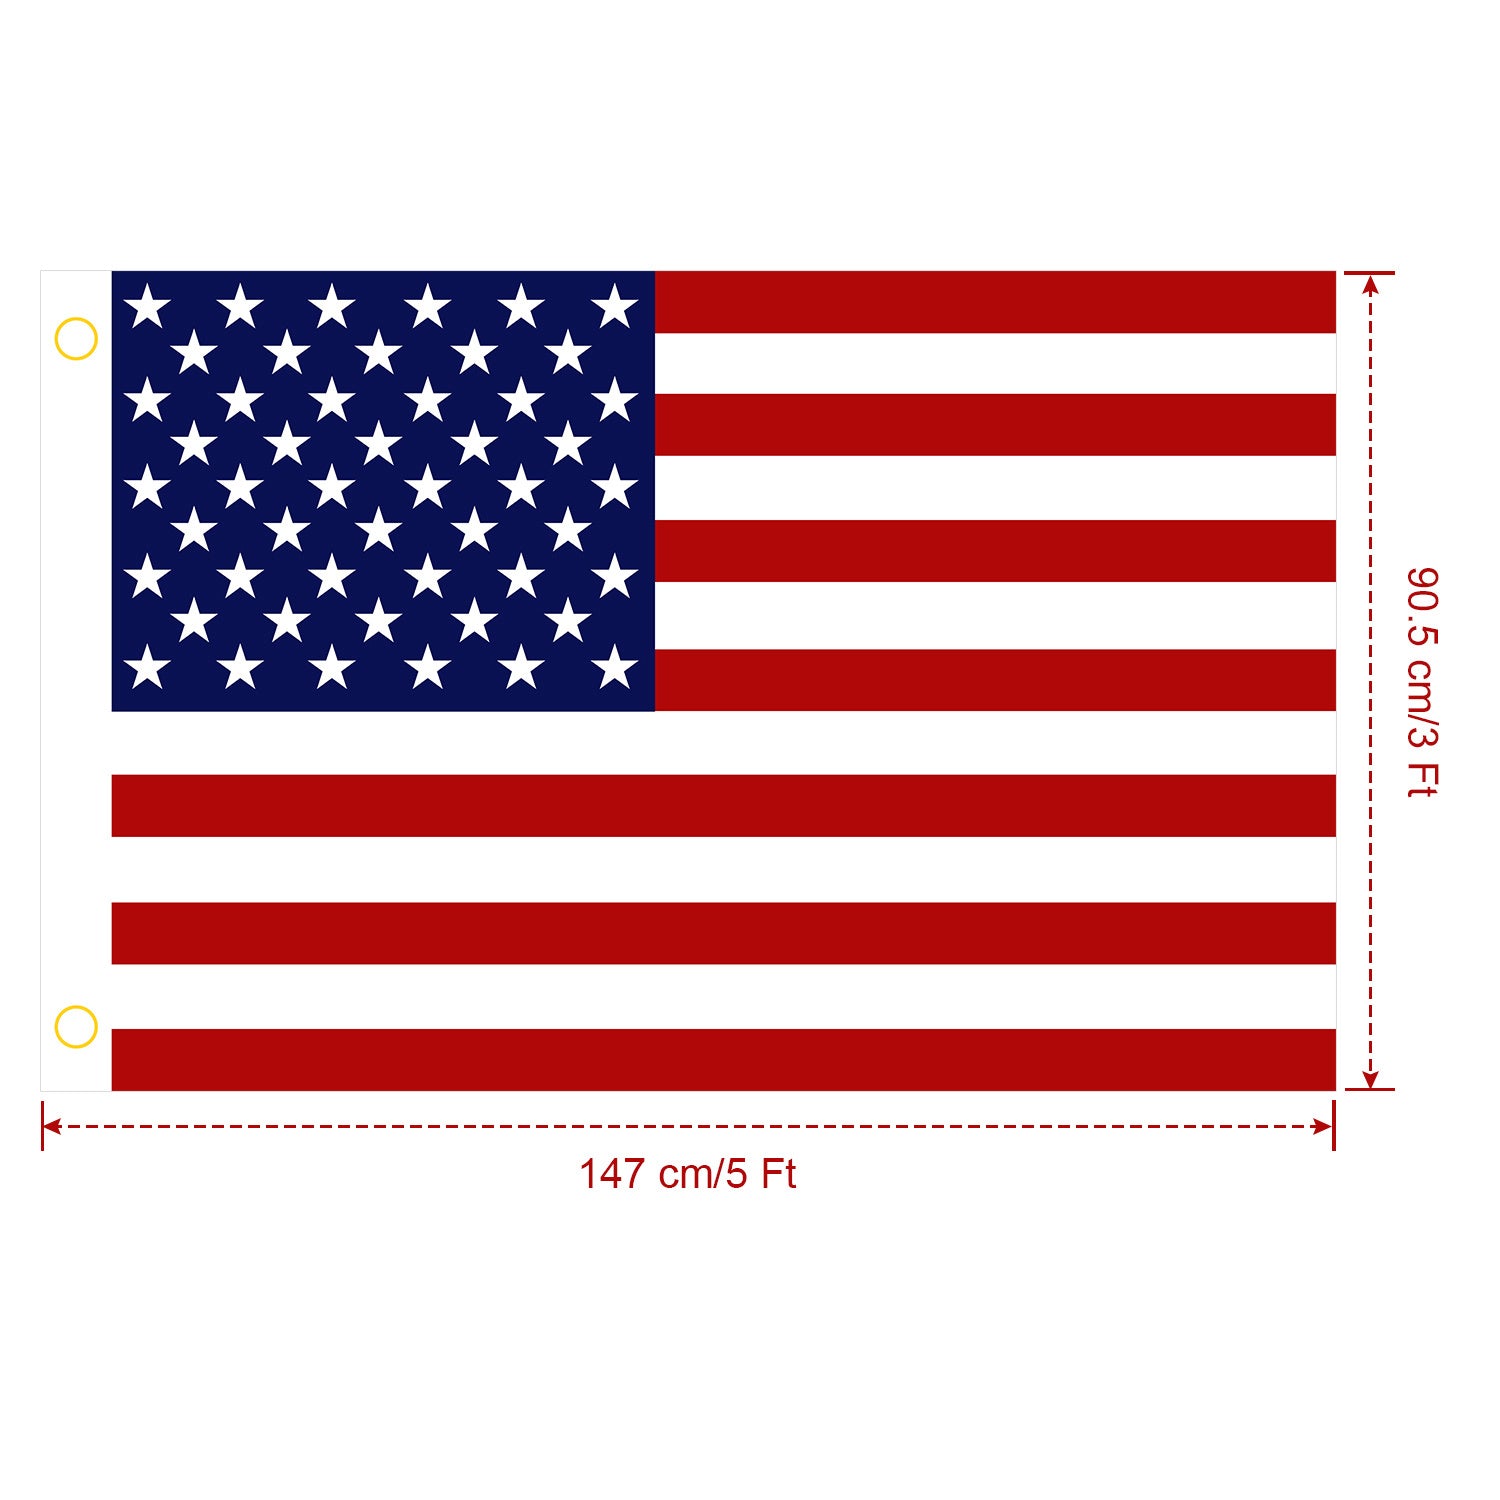 4 Pcs 3 x 5 Ft American US Flags Vivid Color and UV Fade Resistant Canvas Header Double Stitched Moorescarts